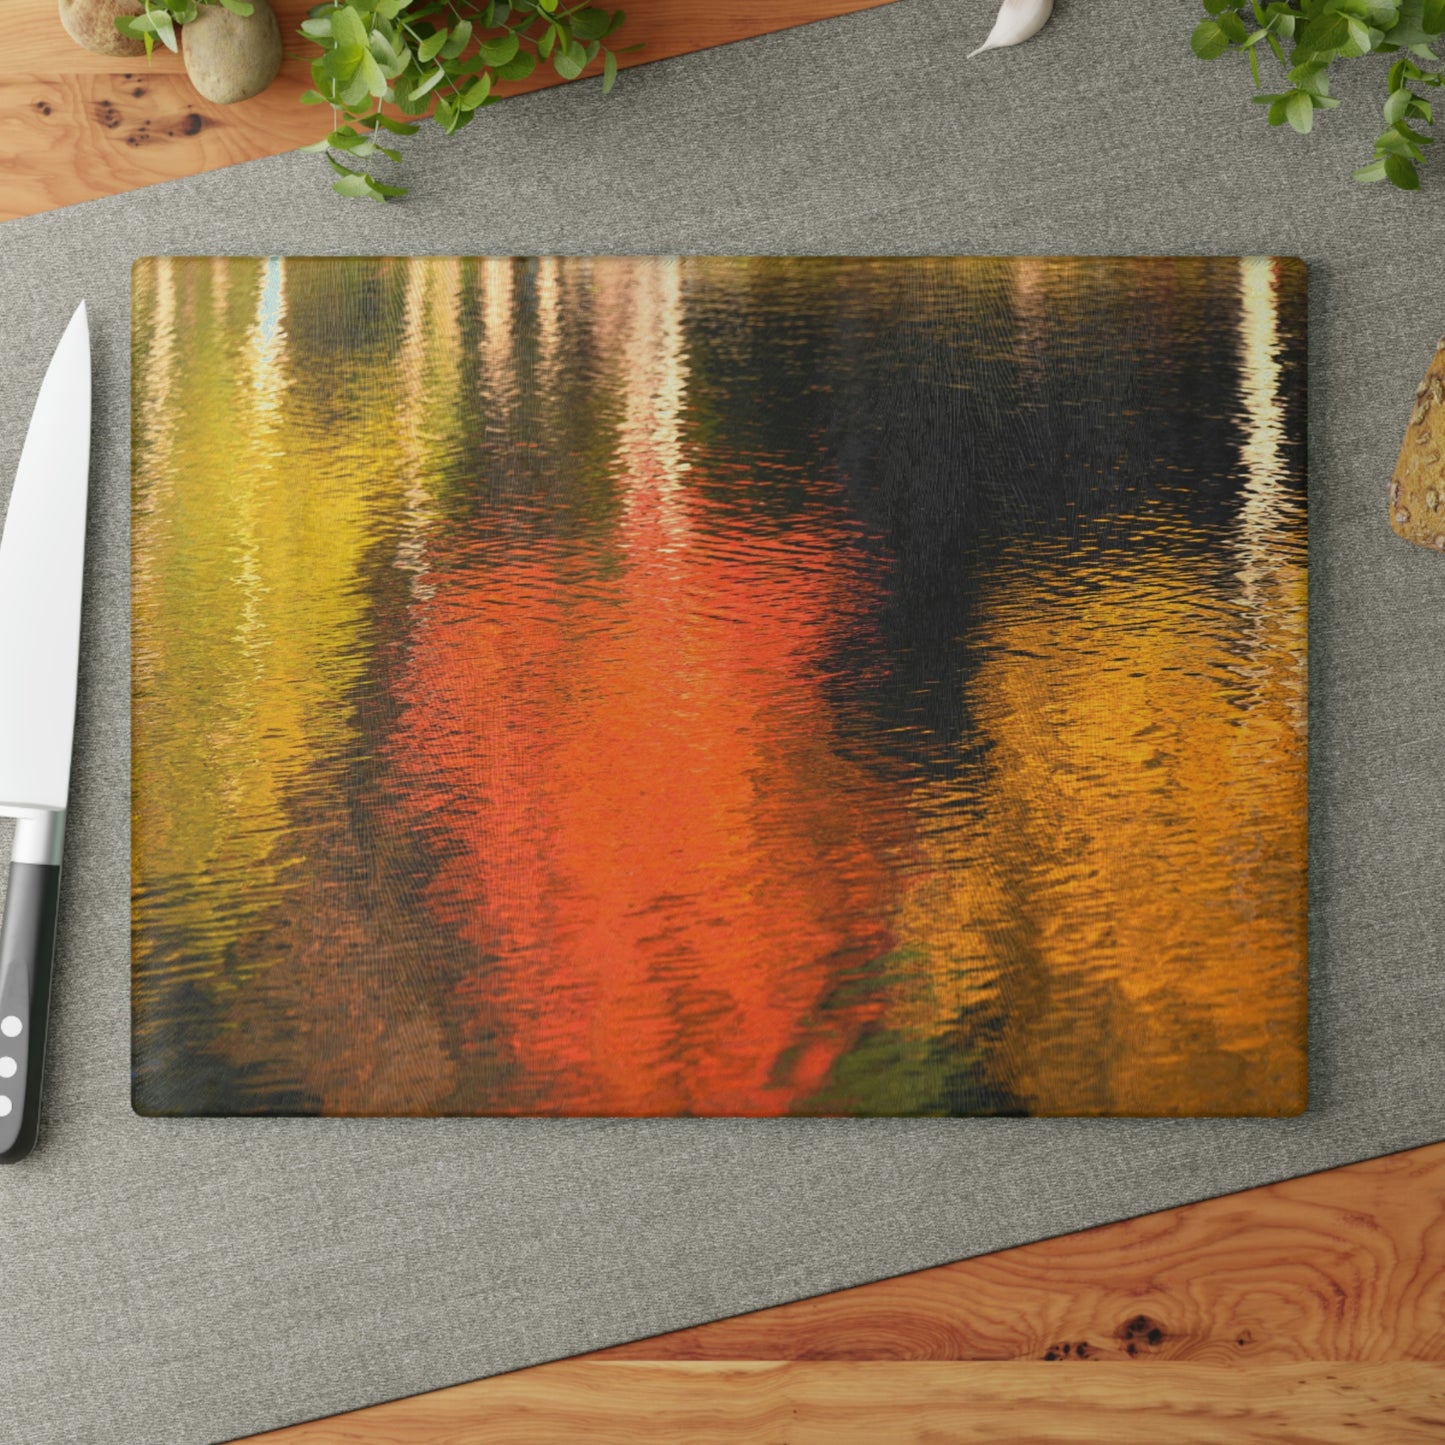 Glass Cutting Board - Reflections of Autumn